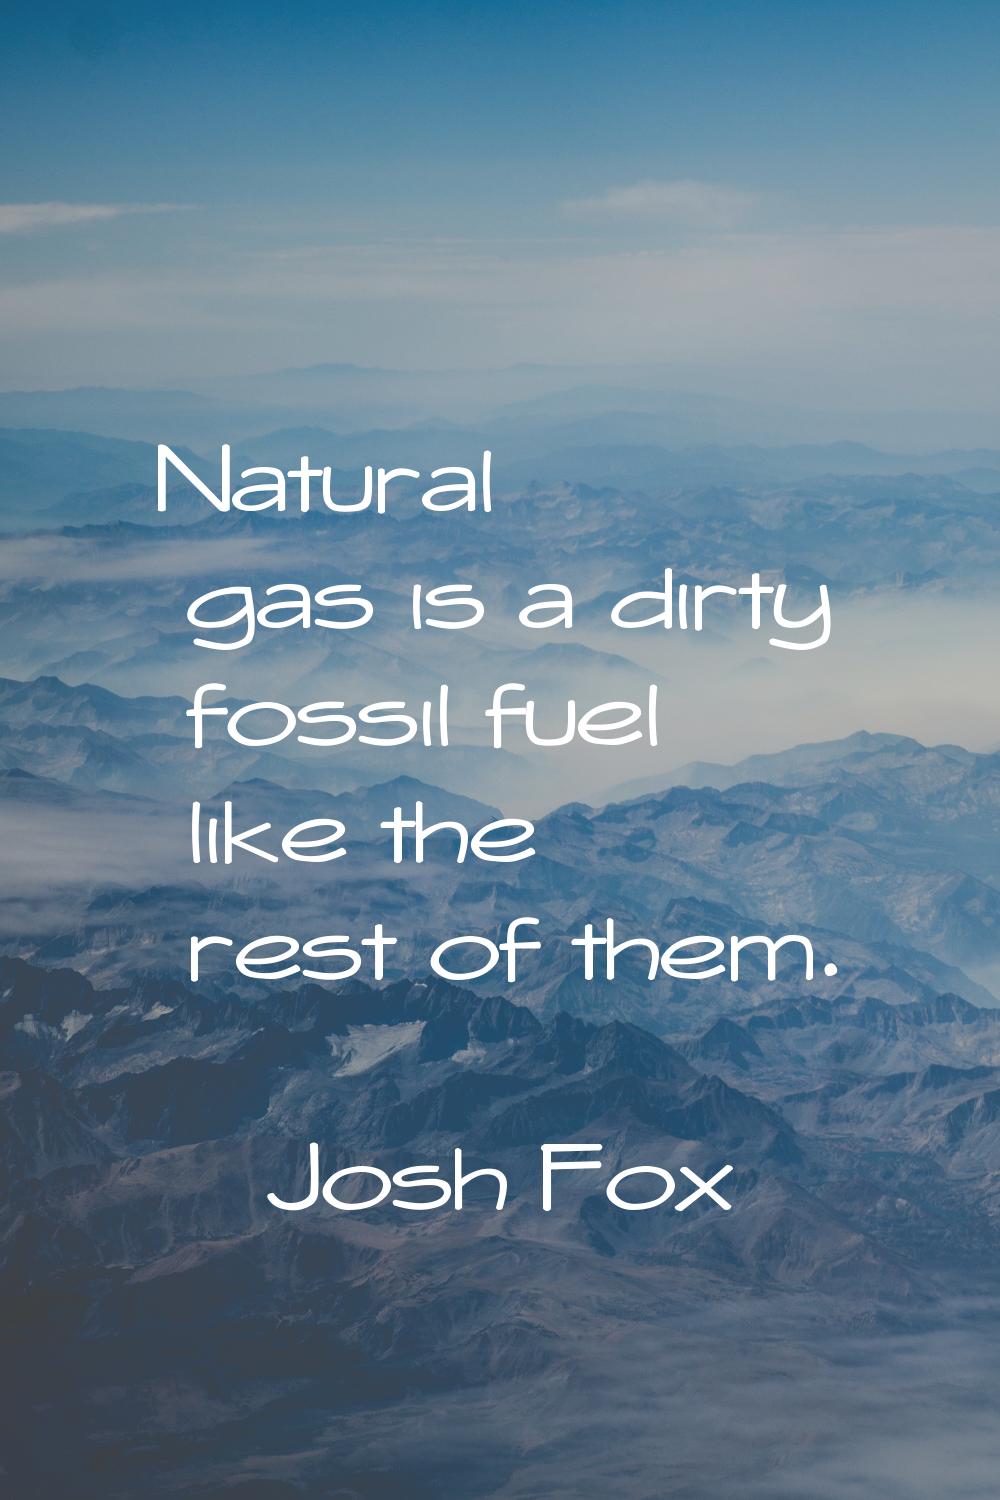 Natural gas is a dirty fossil fuel like the rest of them.